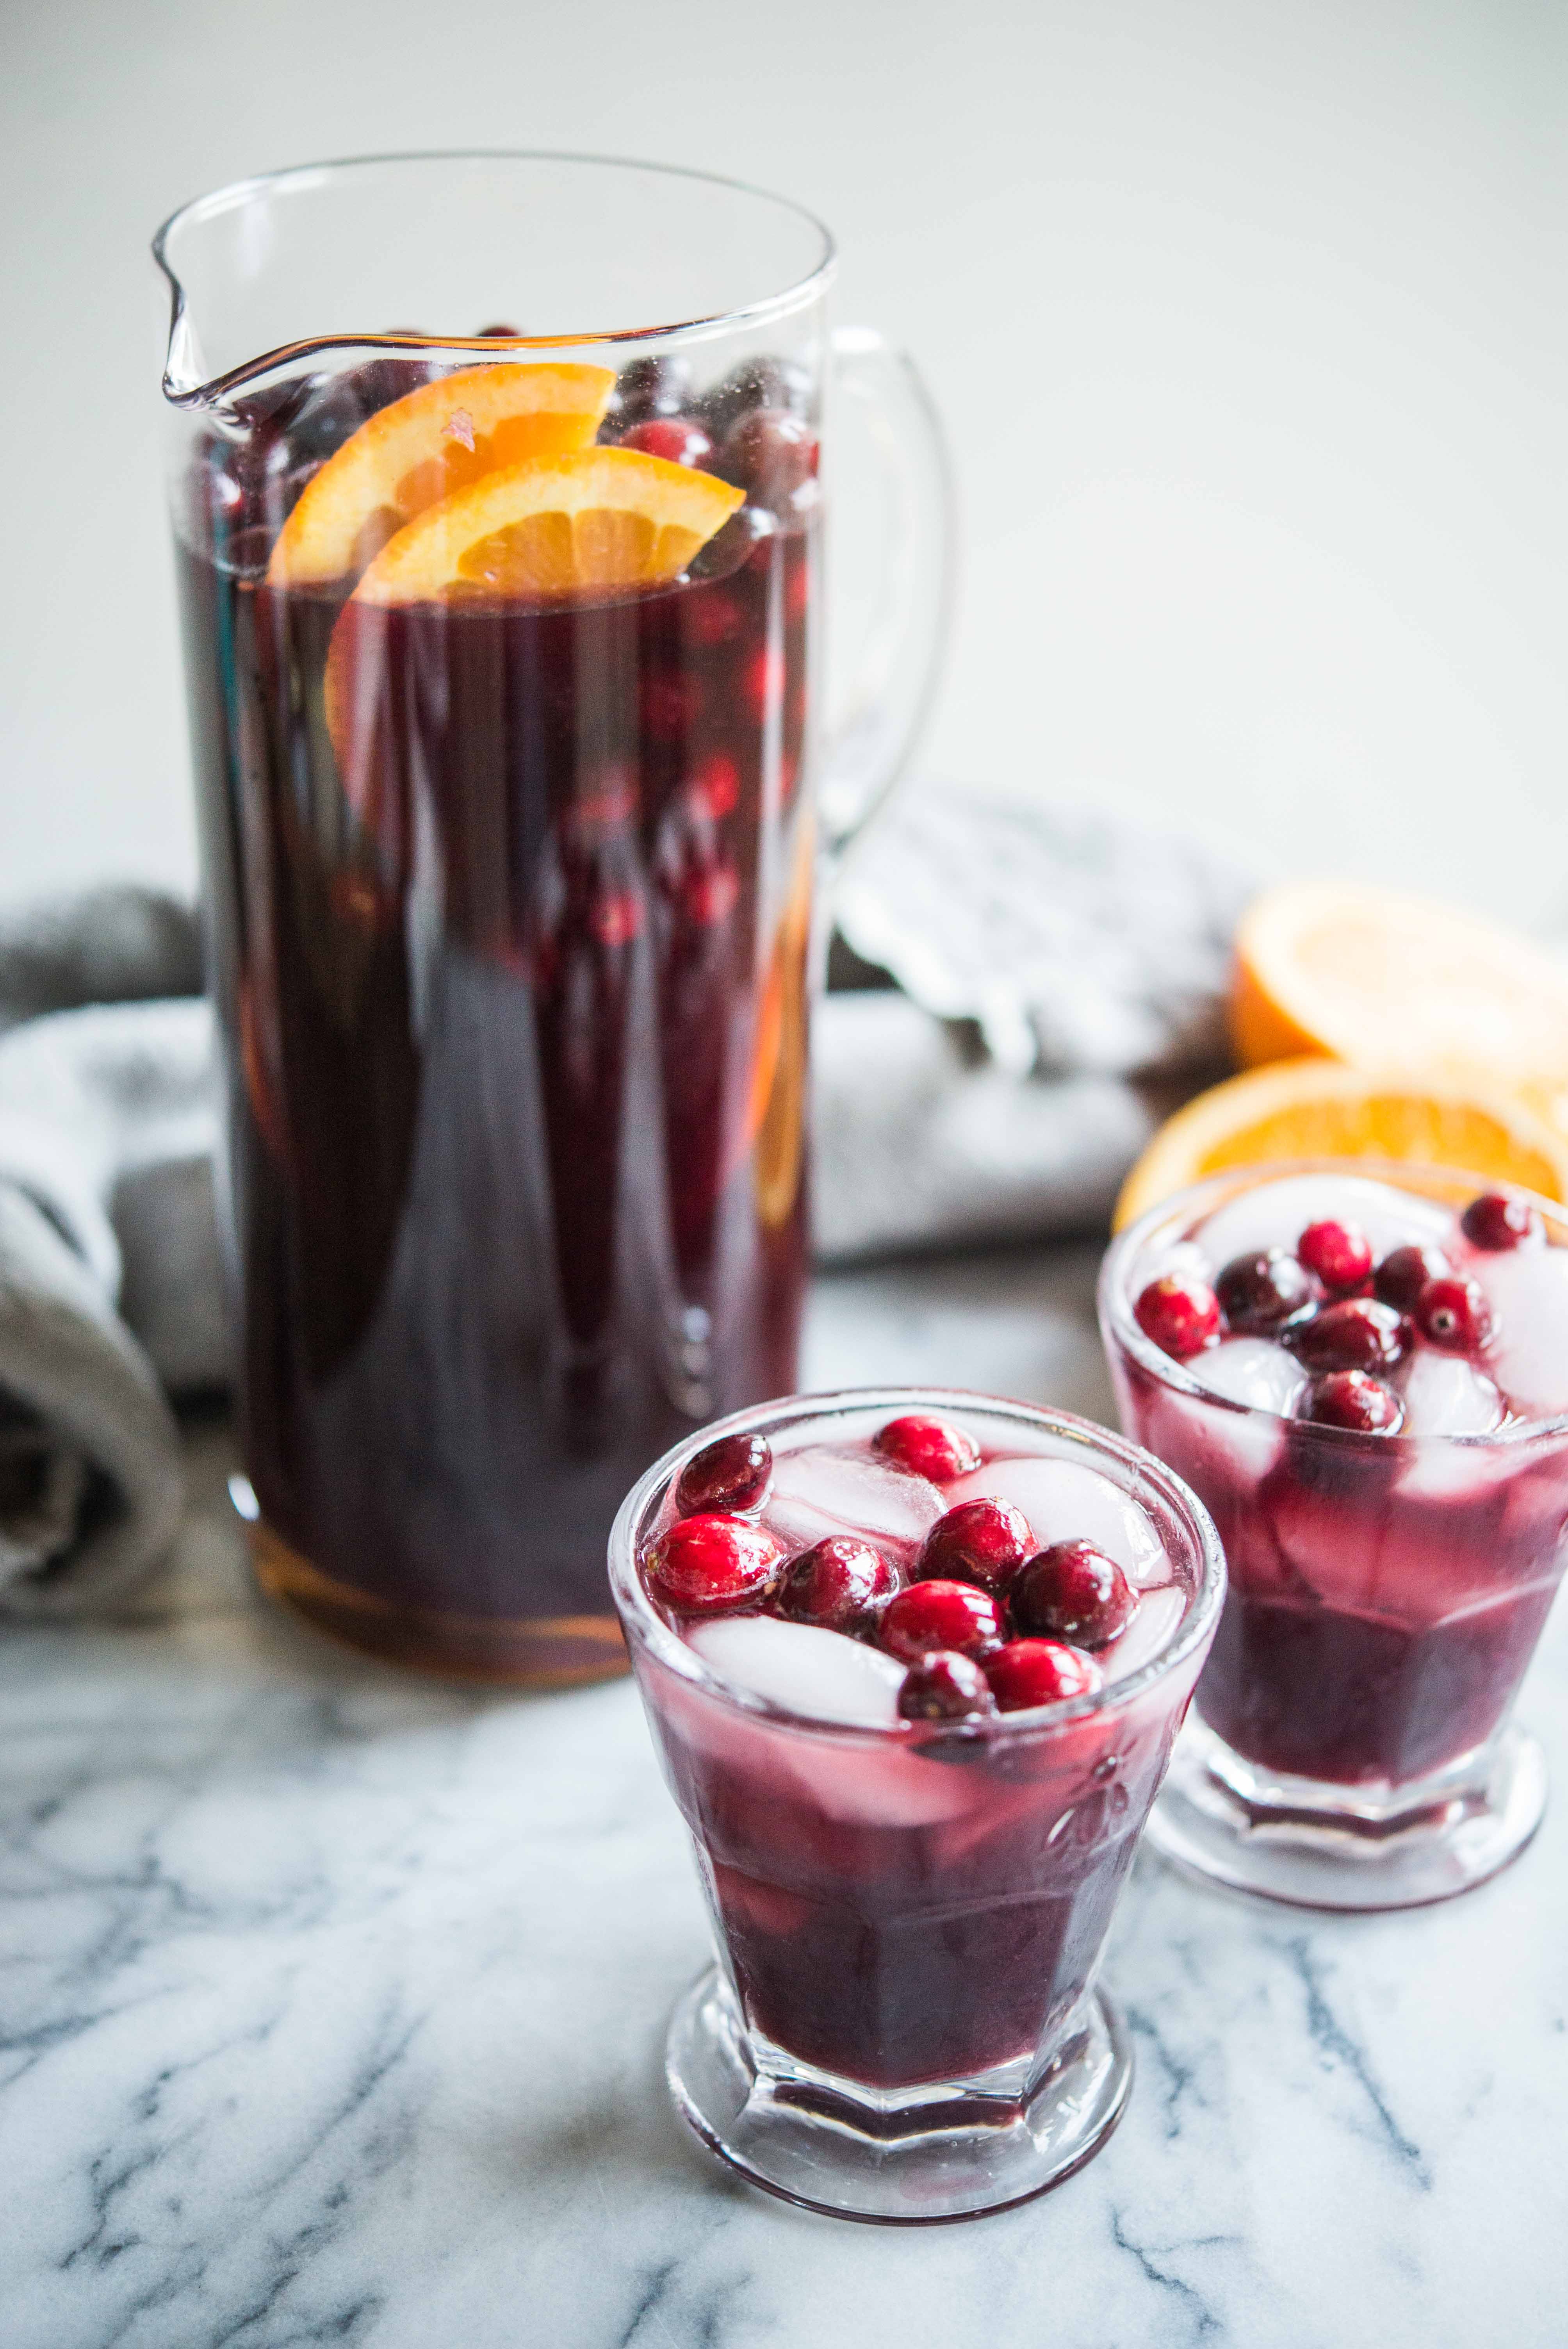 cranberry sangria - the perfect christmas sangria! Red sangria in a glass pitcher topped with oranges and cranberries next to two glasses filled with sangria on a marble board